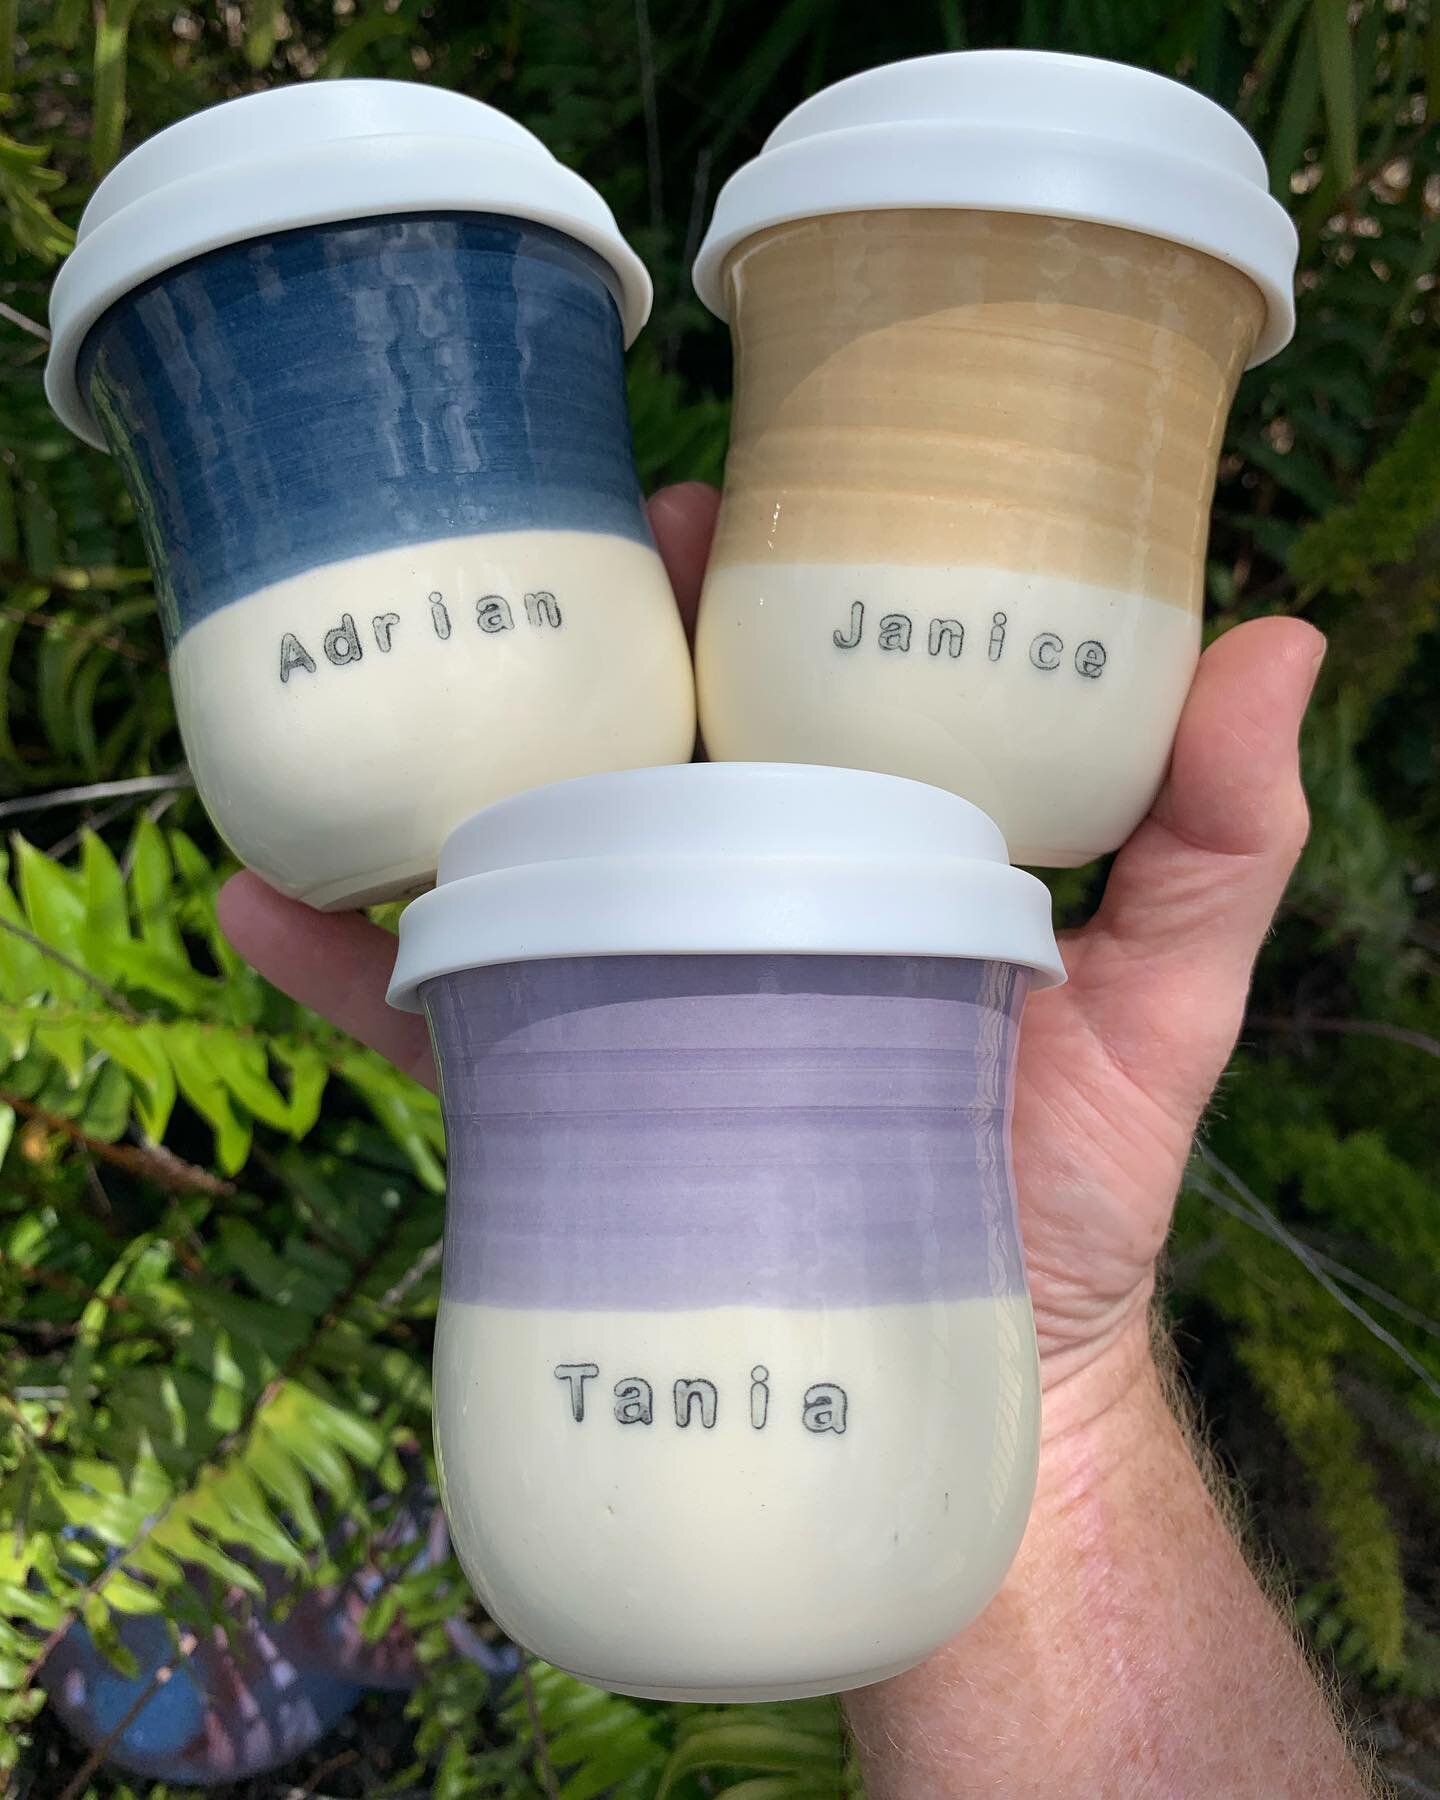 Ready to post for their new owners to enjoy! #theceramicmill #keepcup #travelcup #handmade #greenteam #sustainable #customtravelcup #travelmug #waronwaste #coffeebrisbane #coffesydney #coffeegoldcoast #cup #environment #ceramickeepcup #stockist #byoc